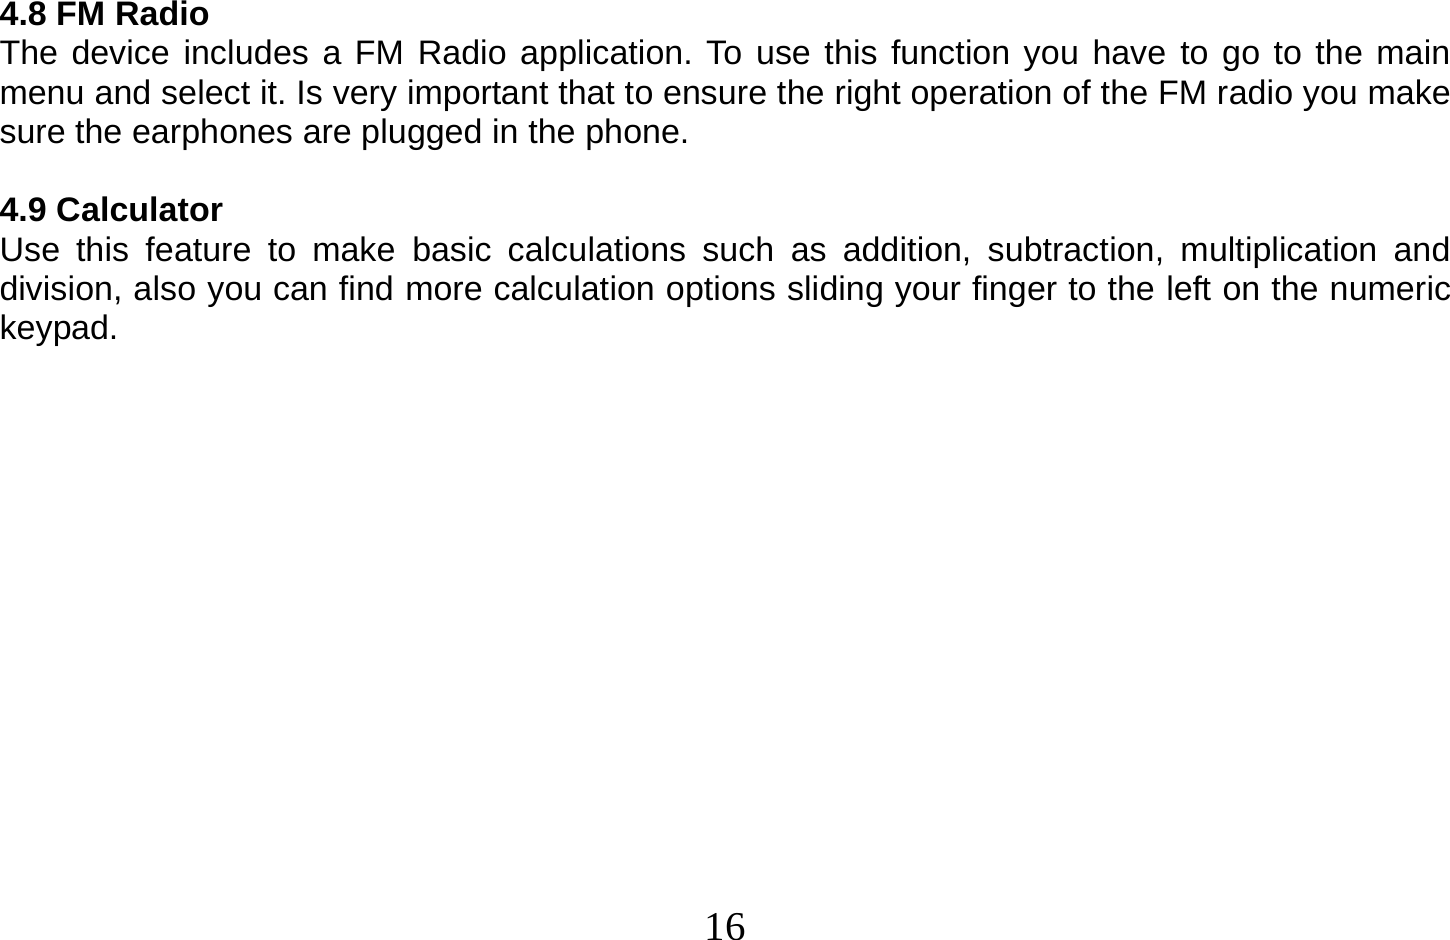  16   4.8 FM Radio The device includes a FM Radio application. To use this function you have to go to the main menu and select it. Is very important that to ensure the right operation of the FM radio you make sure the earphones are plugged in the phone.  4.9 Calculator Use this feature to make basic calculations such as addition, subtraction, multiplication and division, also you can find more calculation options sliding your finger to the left on the numeric keypad.  